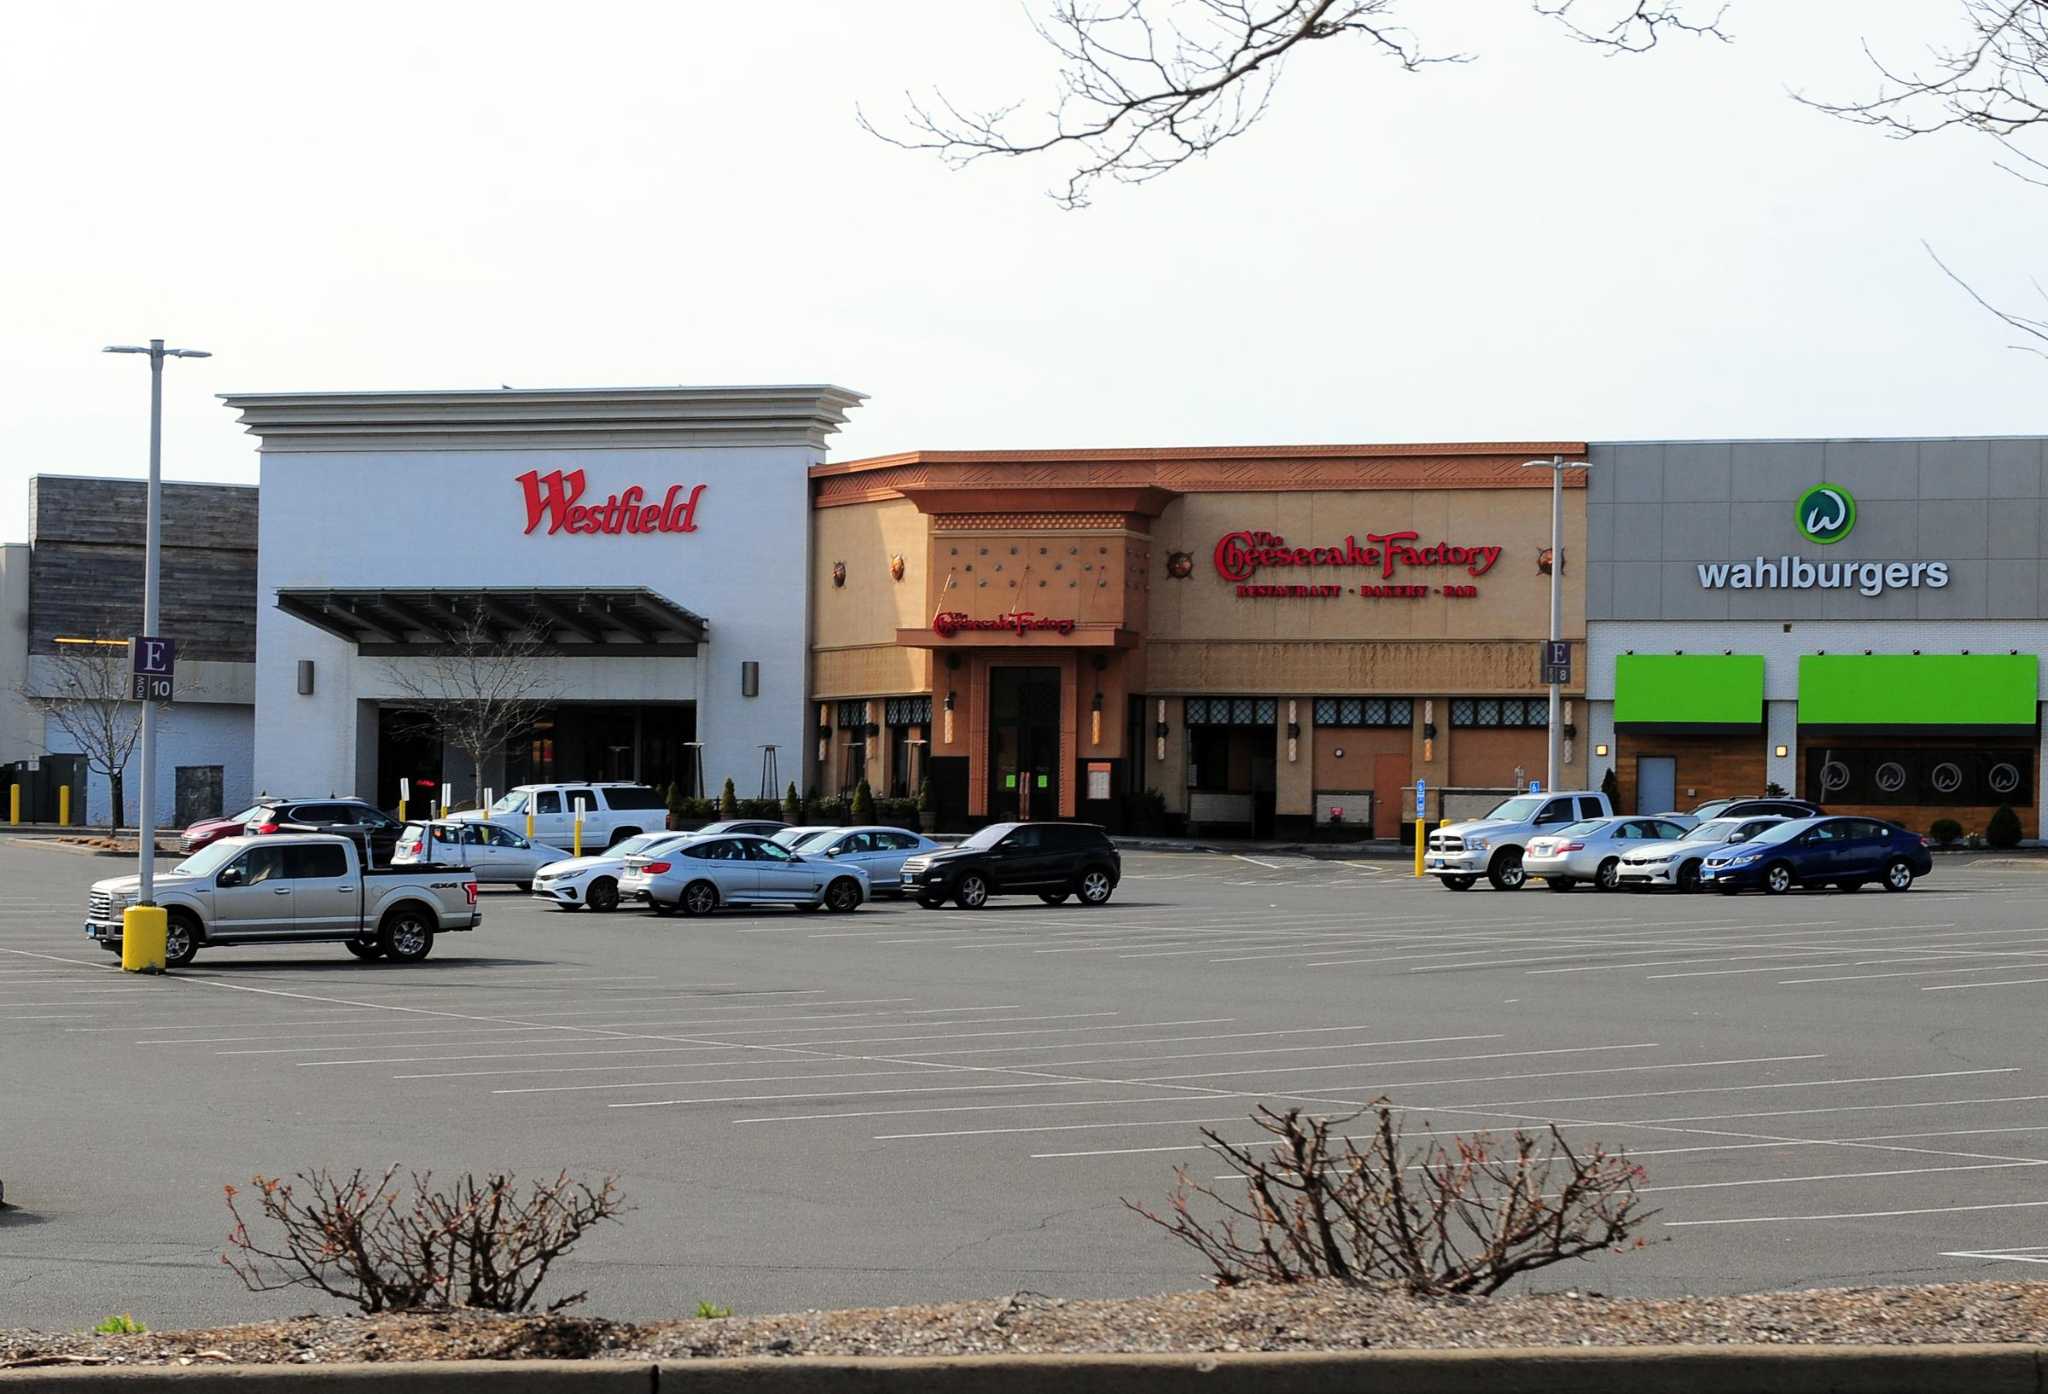 Westfield Garden State Plaza's Parent Selling All U.S. Malls: Reports